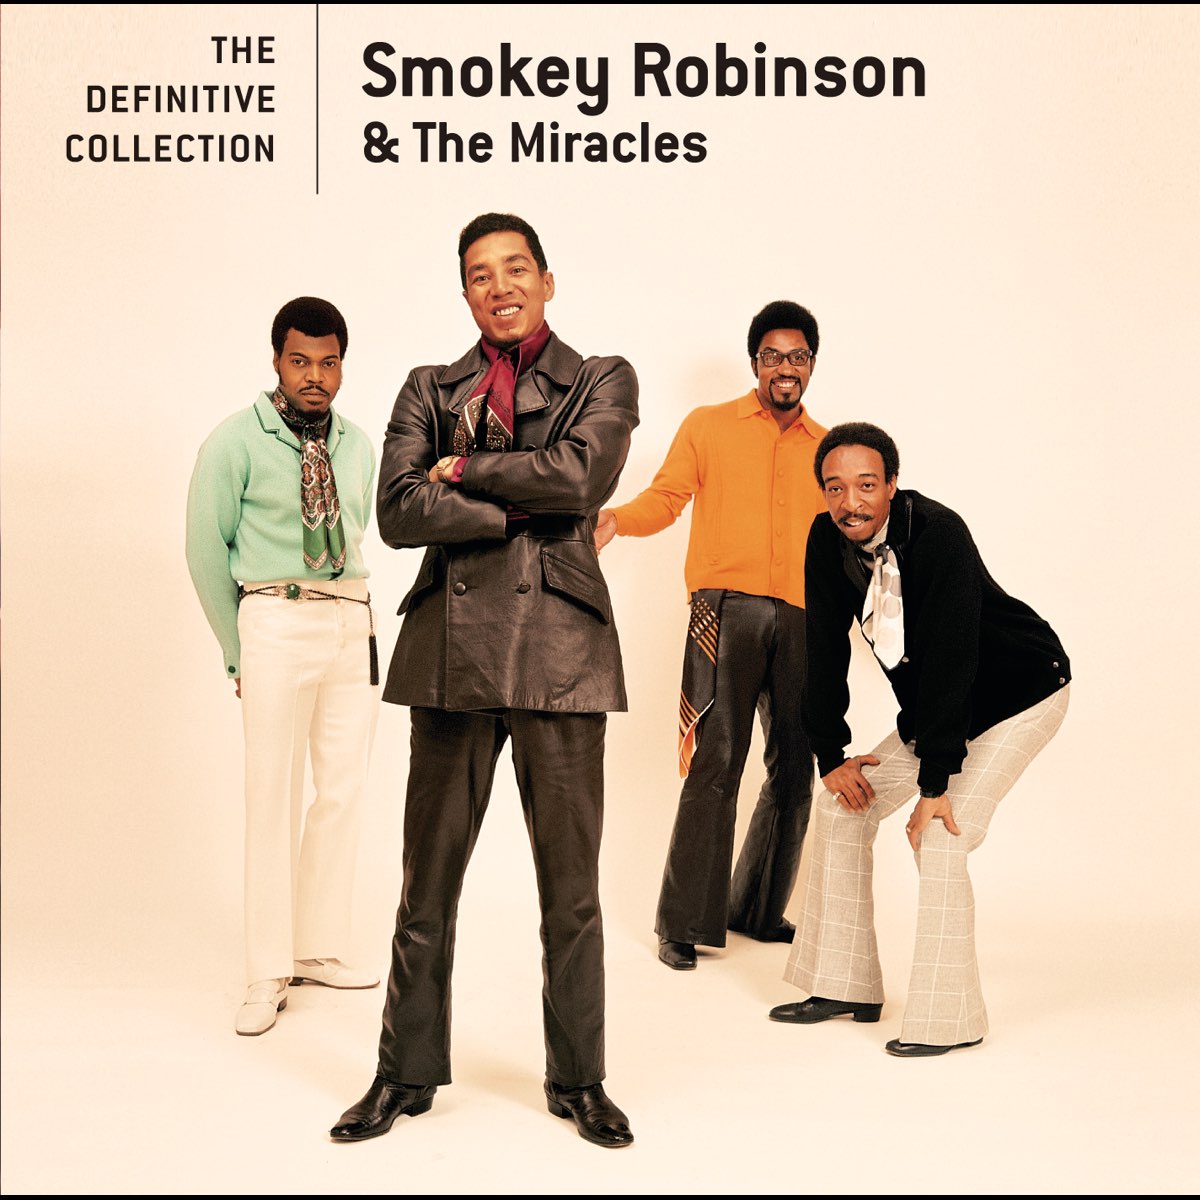 ‎The Definitive Collection Smokey Robinson & The Miracles by Smokey